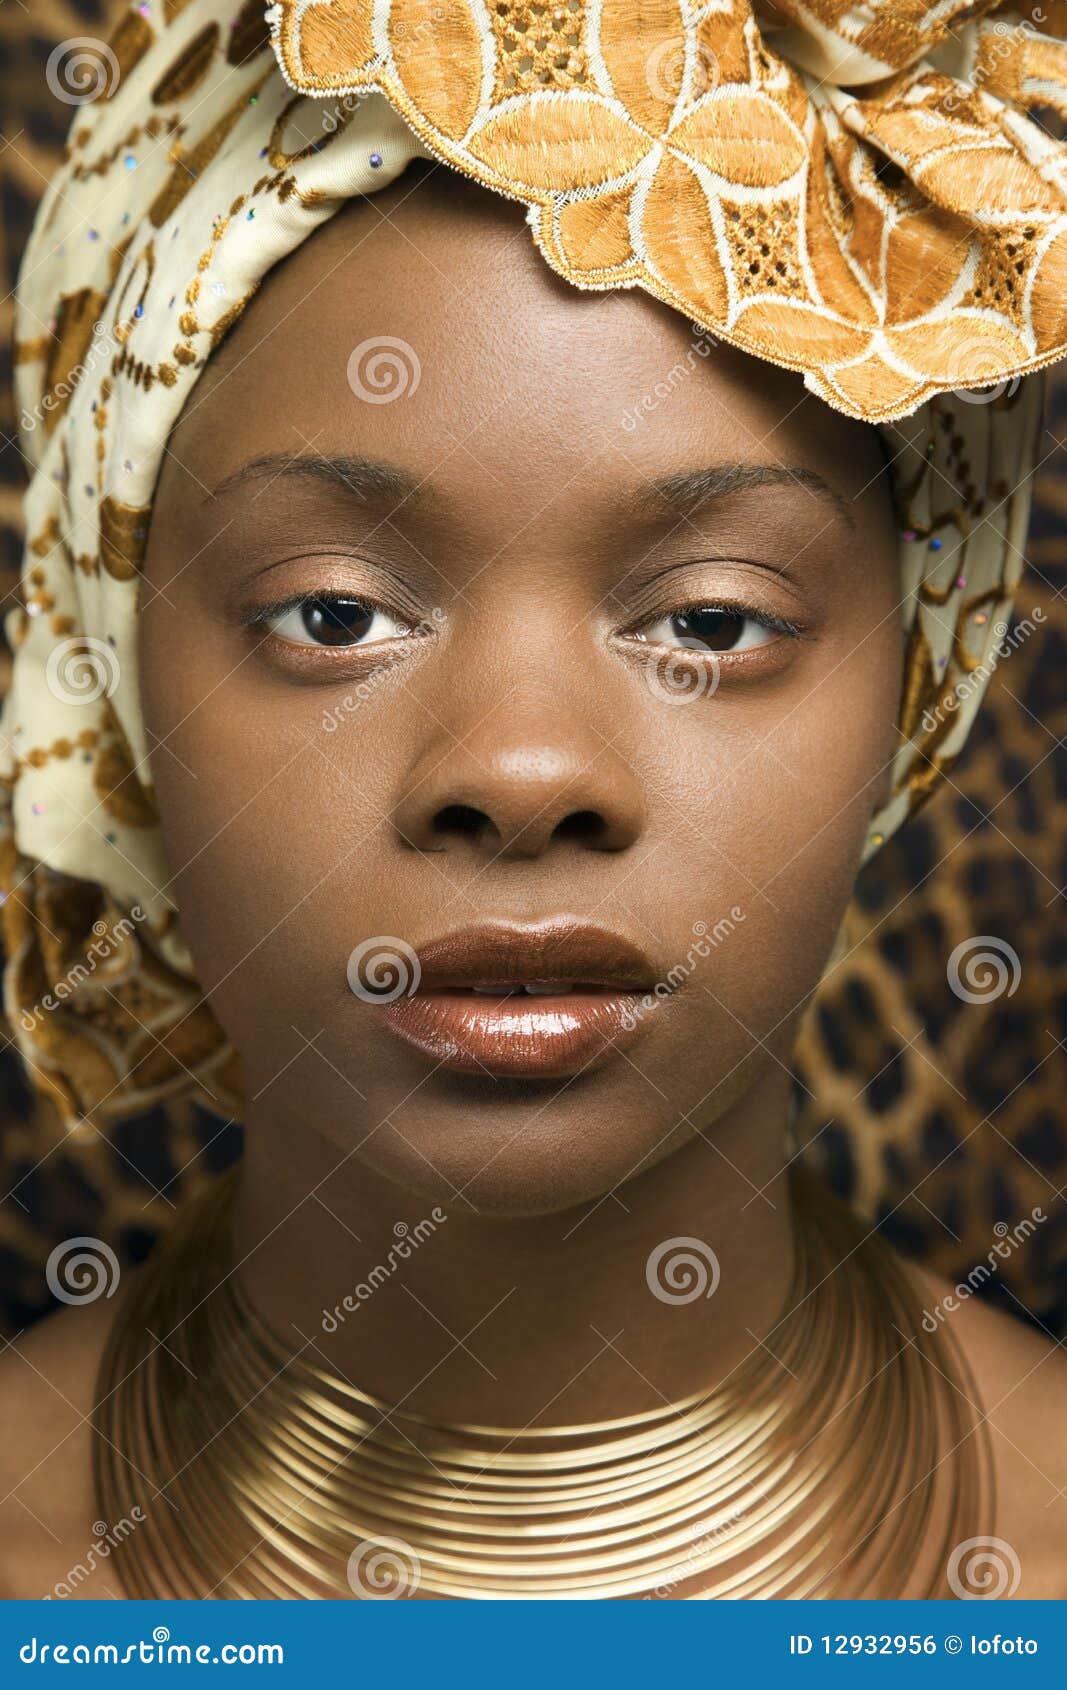 Close-up of Young African American Woman in Tradit. Close-up portrait of an African American woman wearing traditional African clothing in front of a patterned wall. Vertical format.